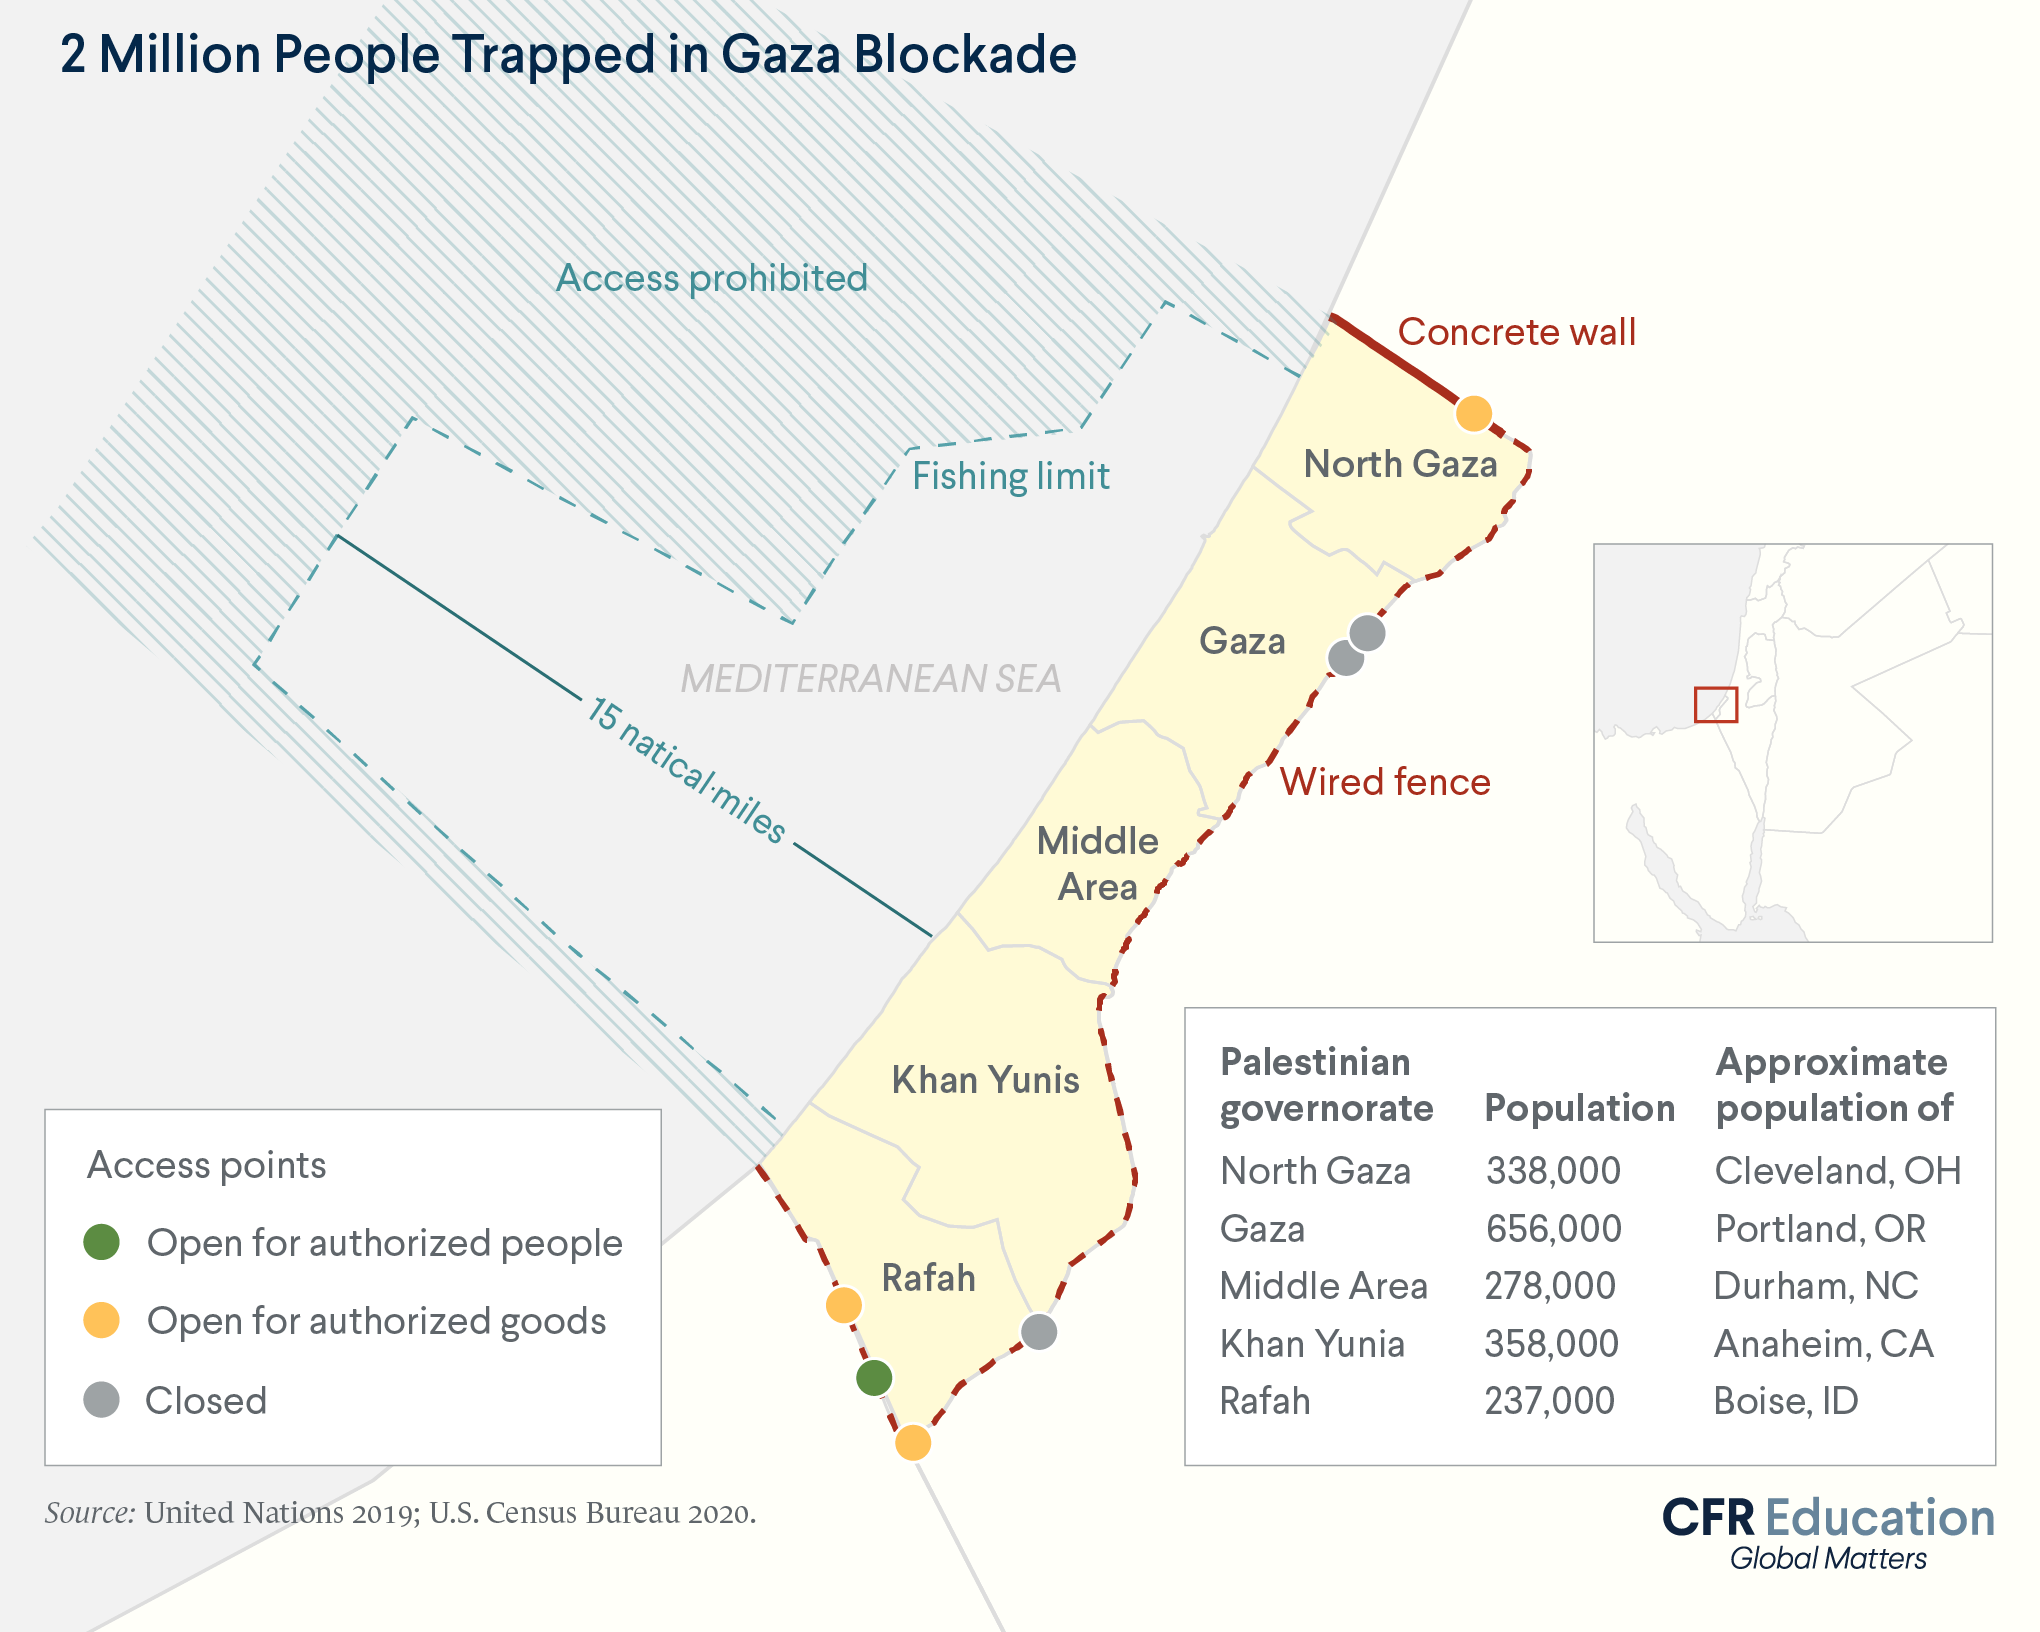 Map shows the Gaza blockade. Israel and Egypt, Gaza’s two neighbors, imposed a near-total land and sea blockade in 2007. Sources: United Nations 2019; Census Bureau 2020. For more info contact us at cfr_education@cfr.org.